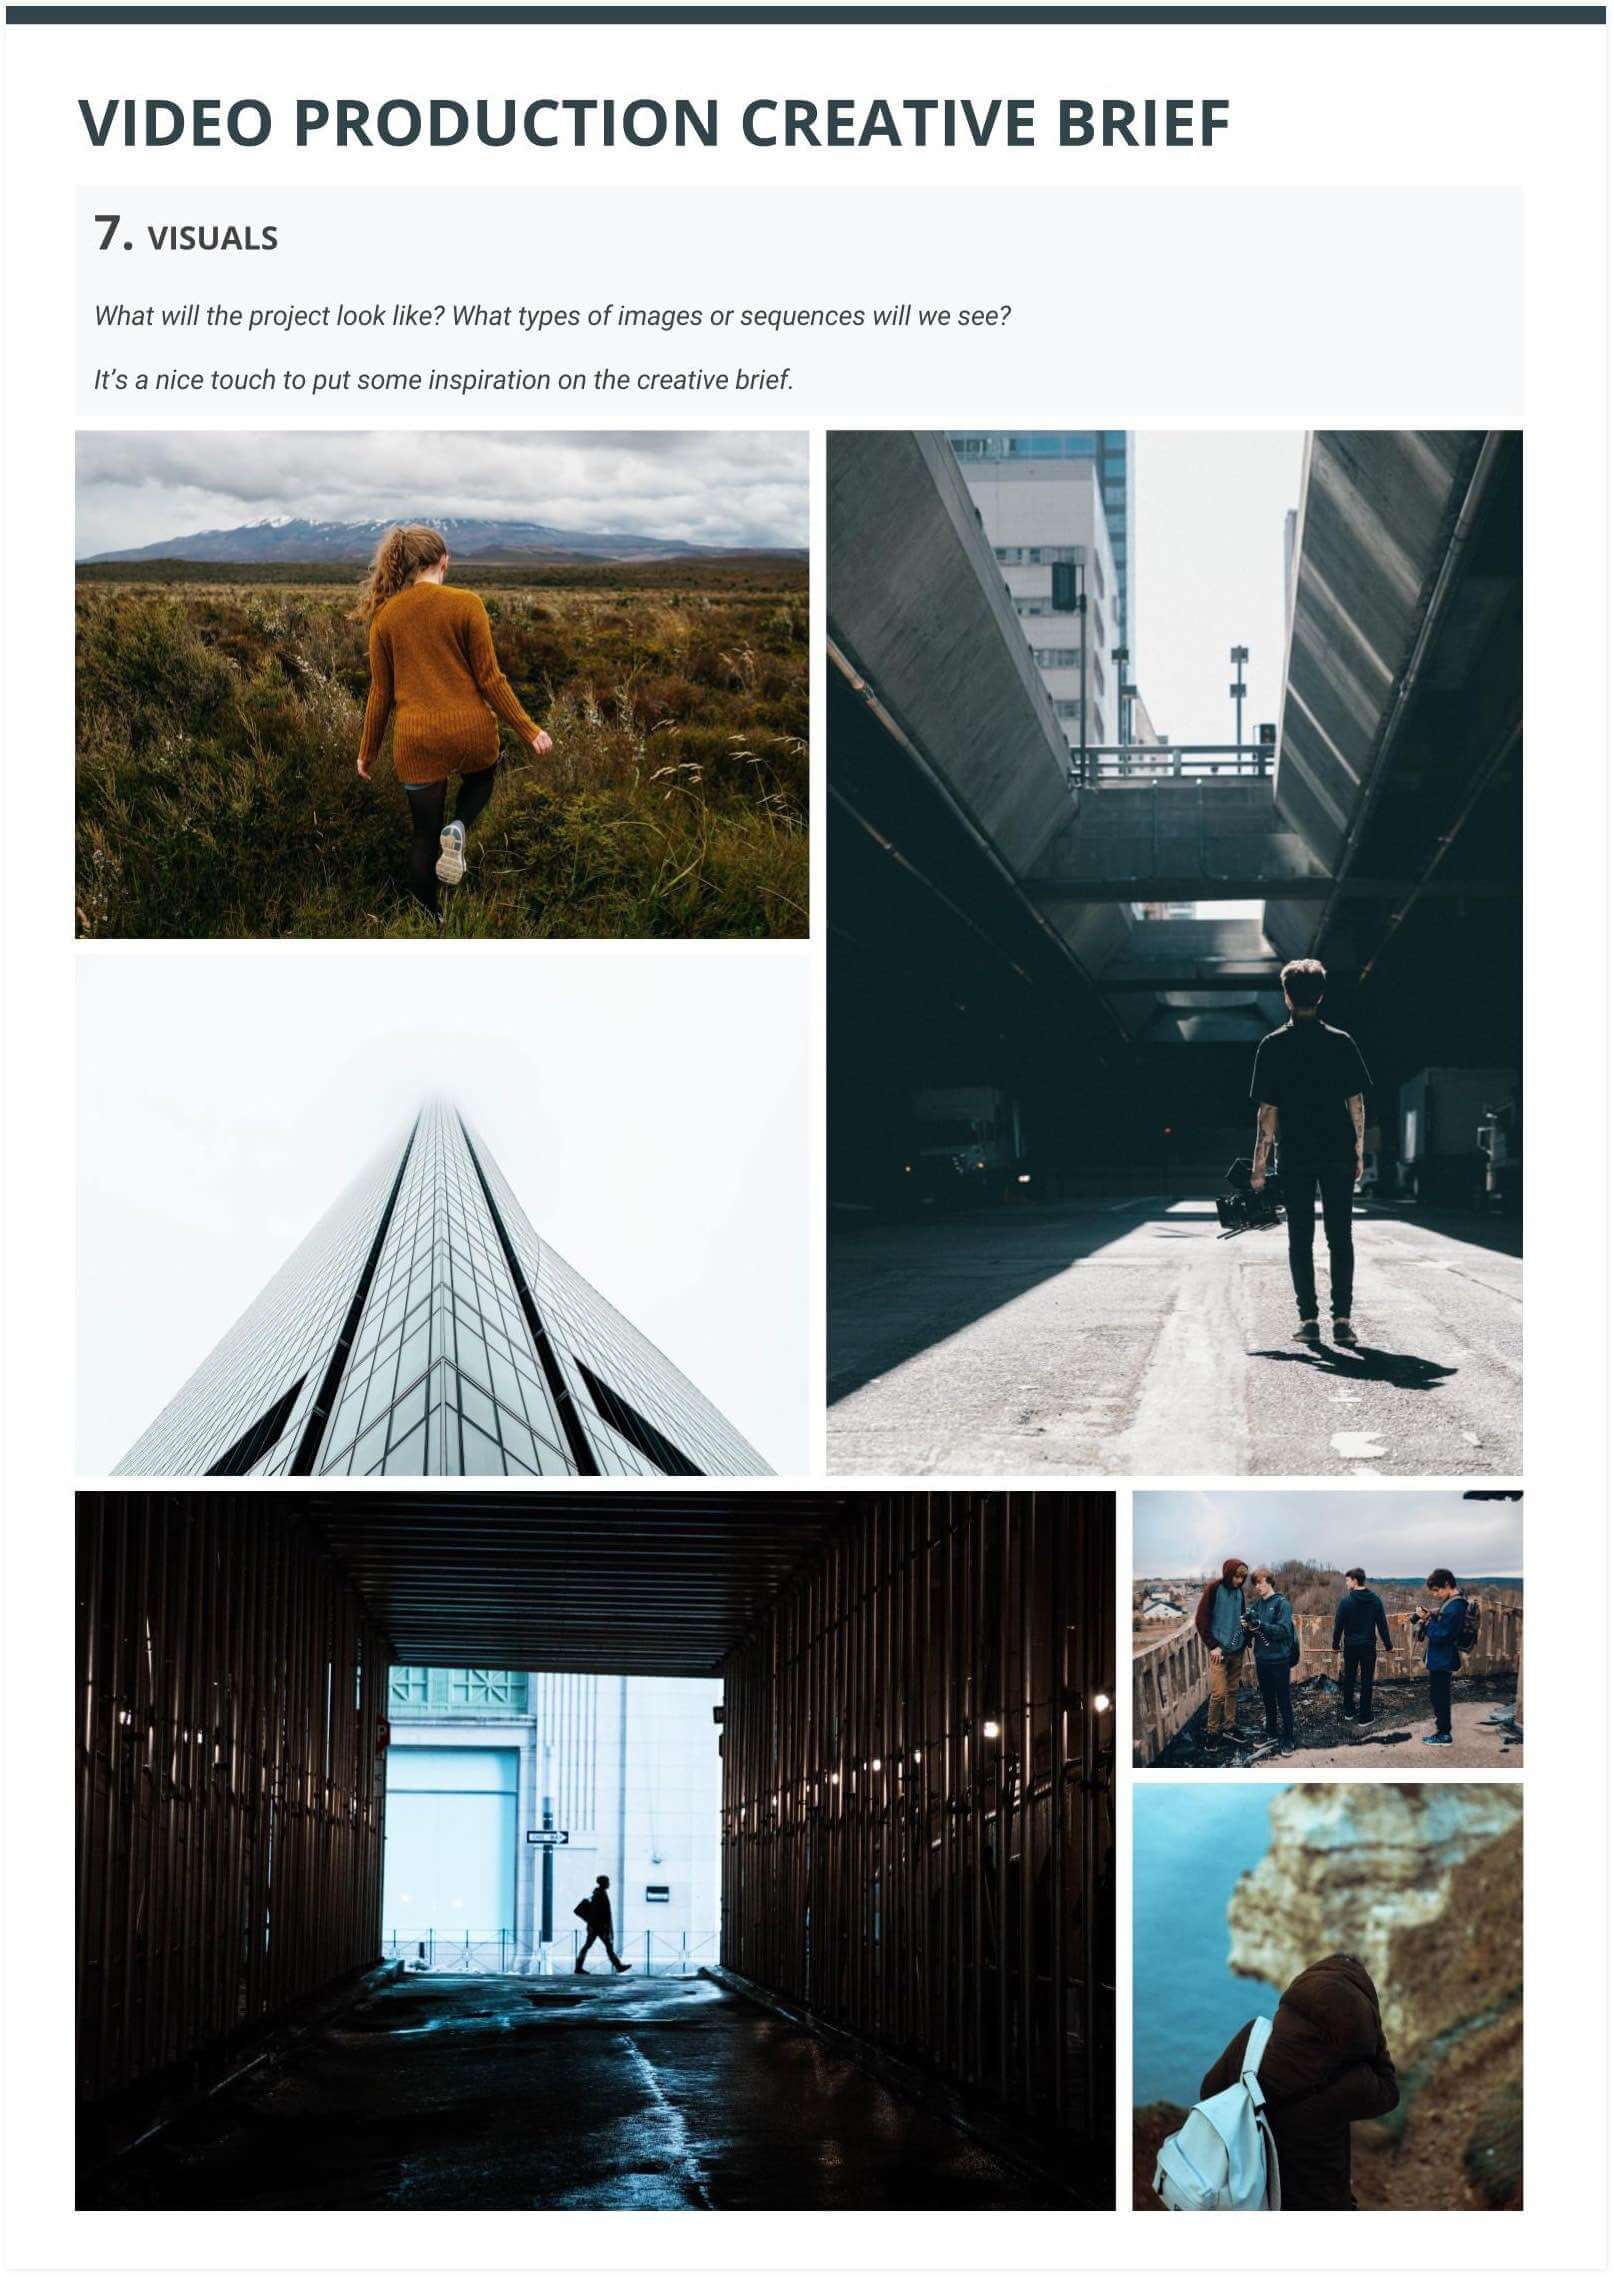 The Best Creative Brief Template For Video Agencies [Free Download] - Section 7 - Mood Board Visuals